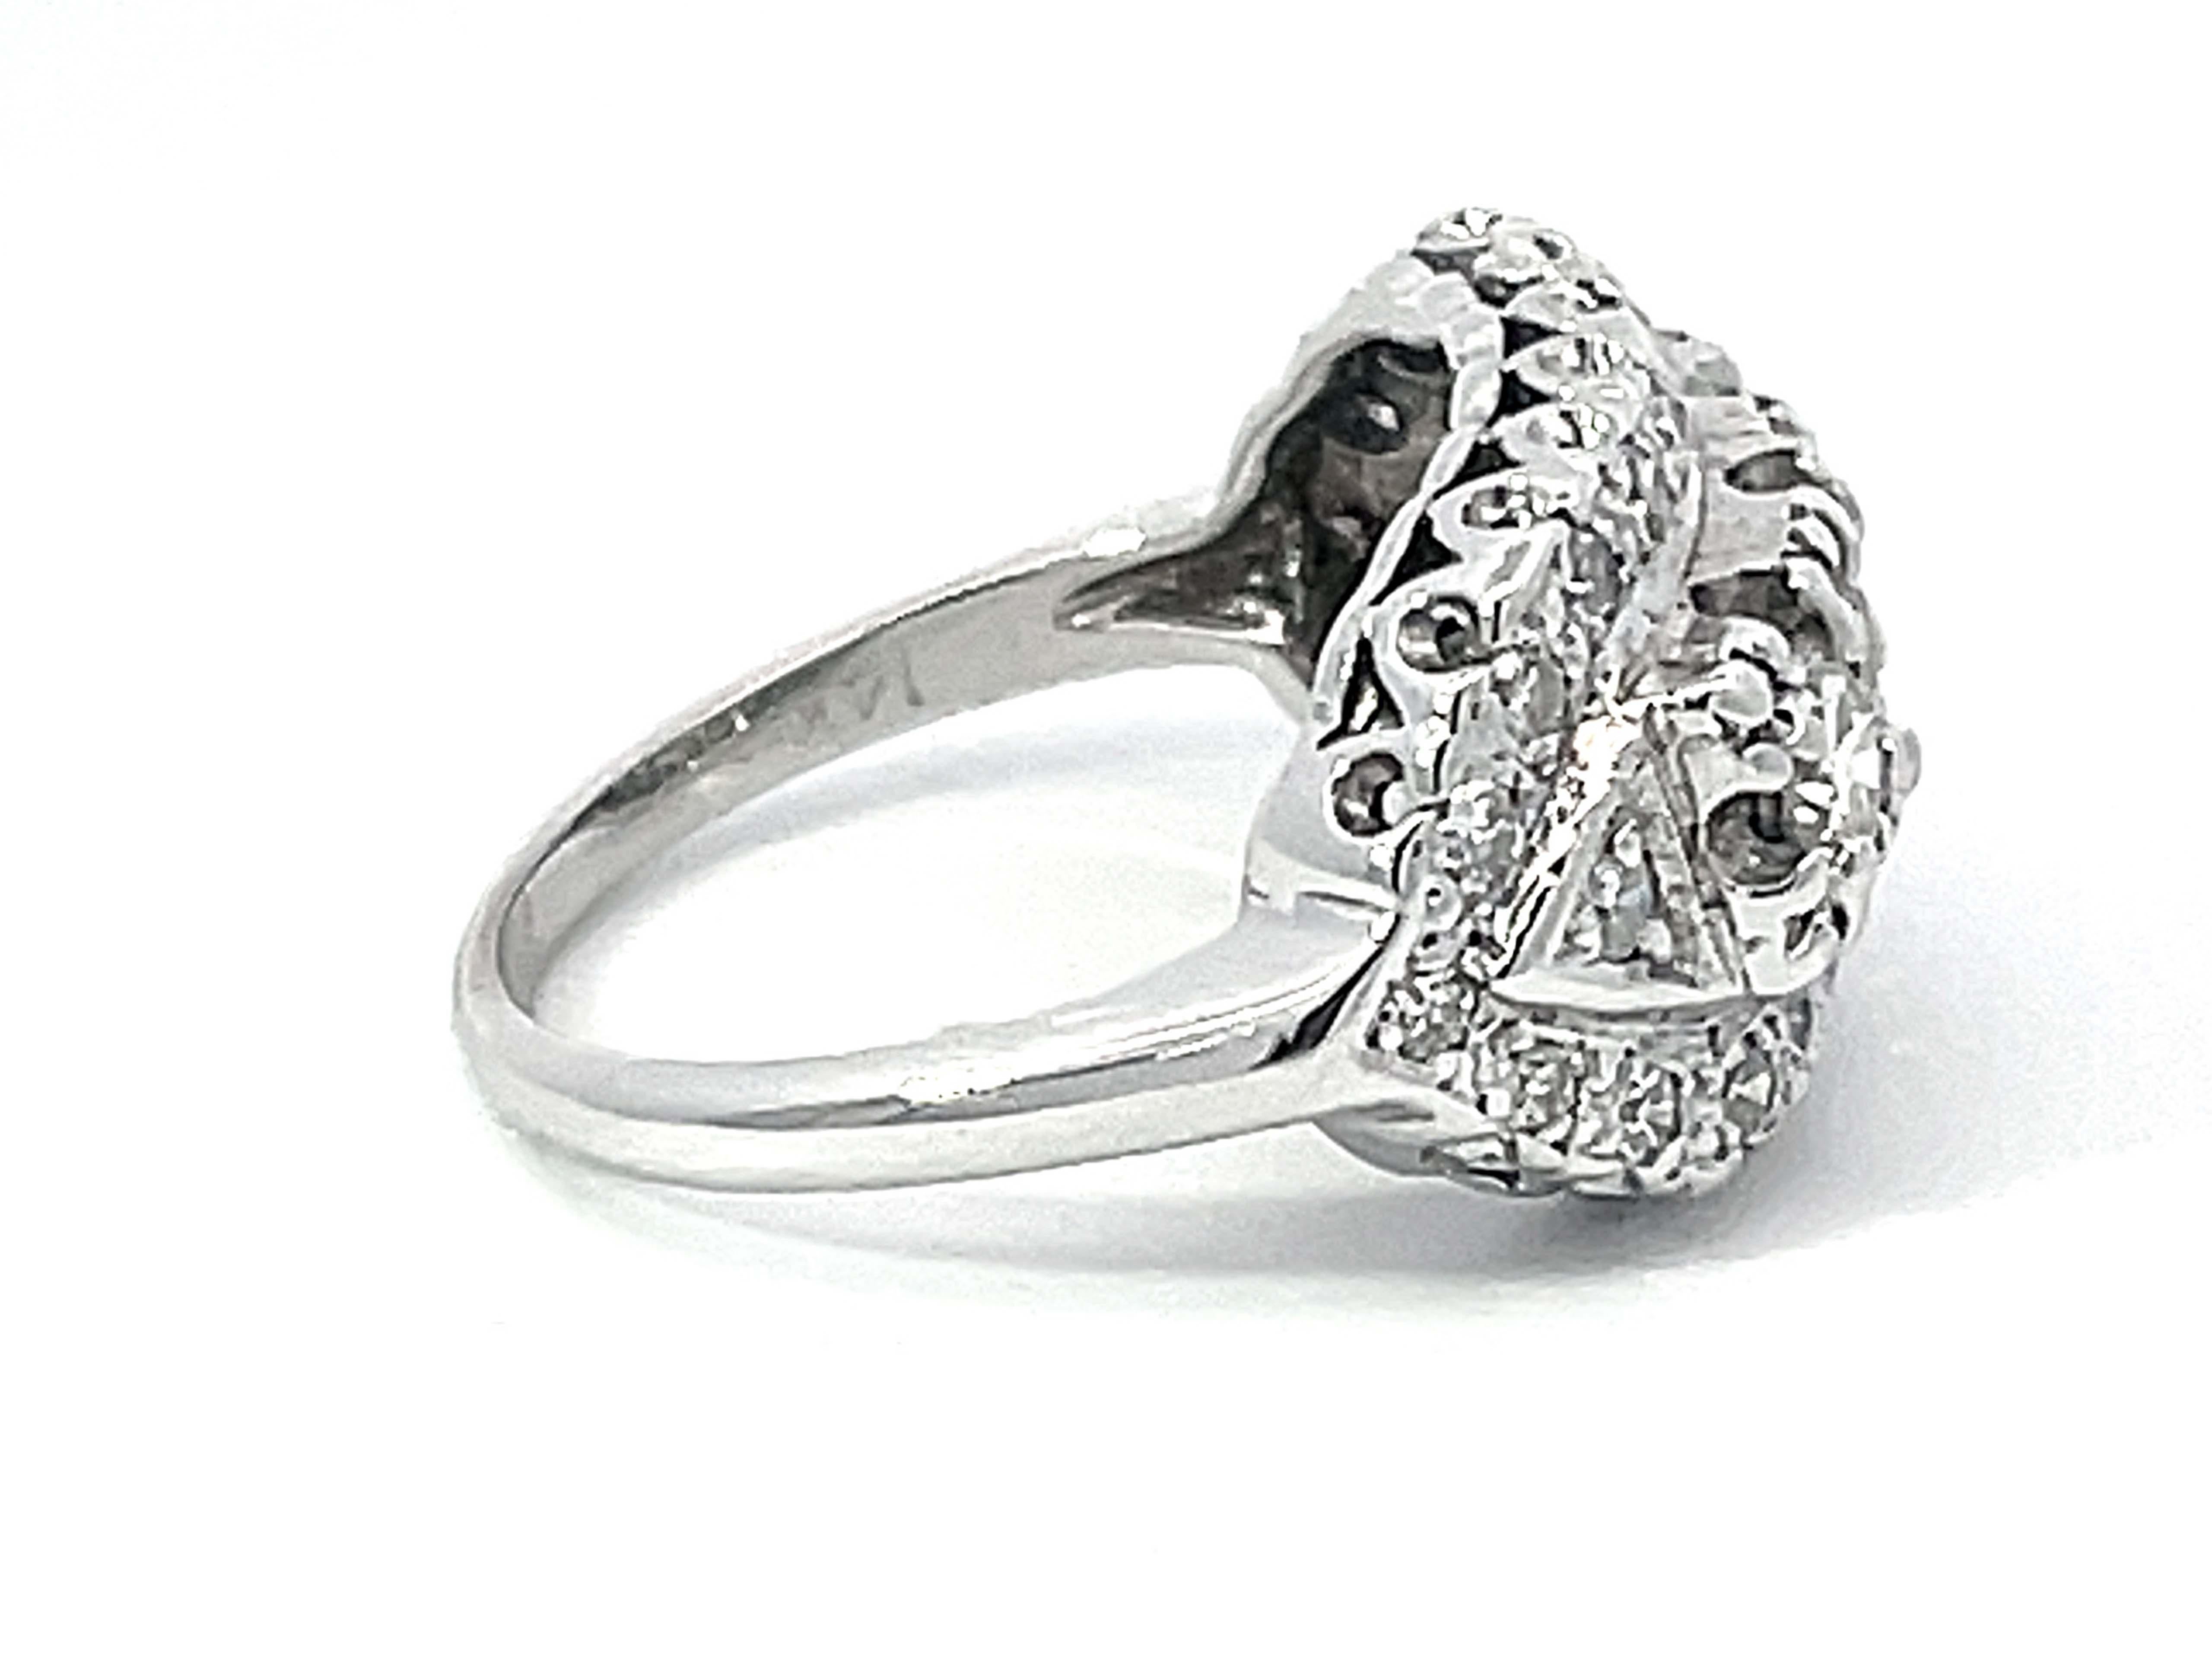 Multi Diamond Band Ring in 14k White Gold In Excellent Condition For Sale In Honolulu, HI